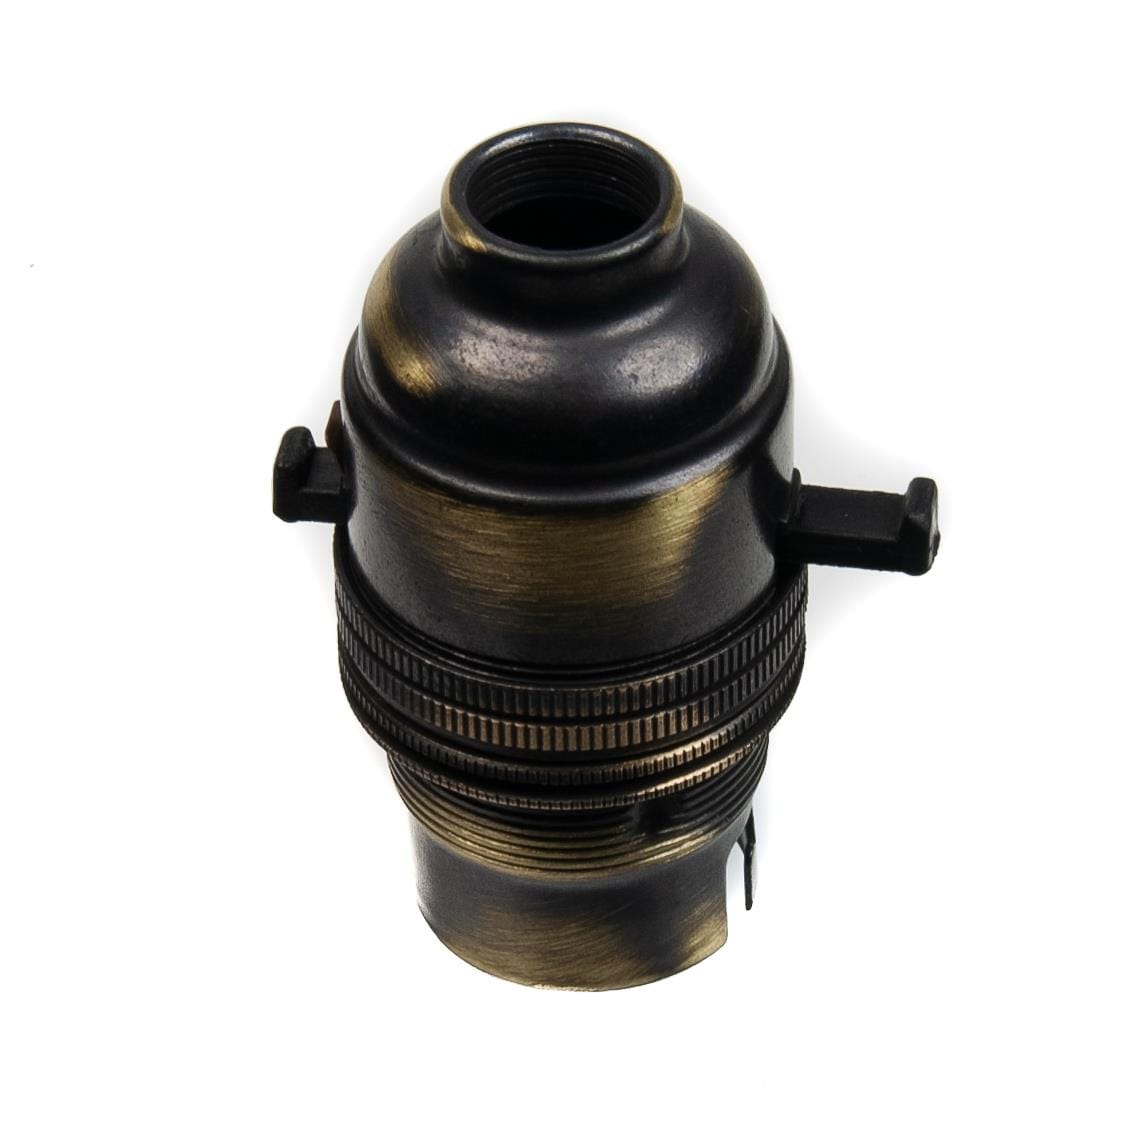 Switched Lamp Holder Antique Effect Bayonet Cap (BC) (B22d) 10mm Screw Thread Switched Lampholders Thunderfix 900633